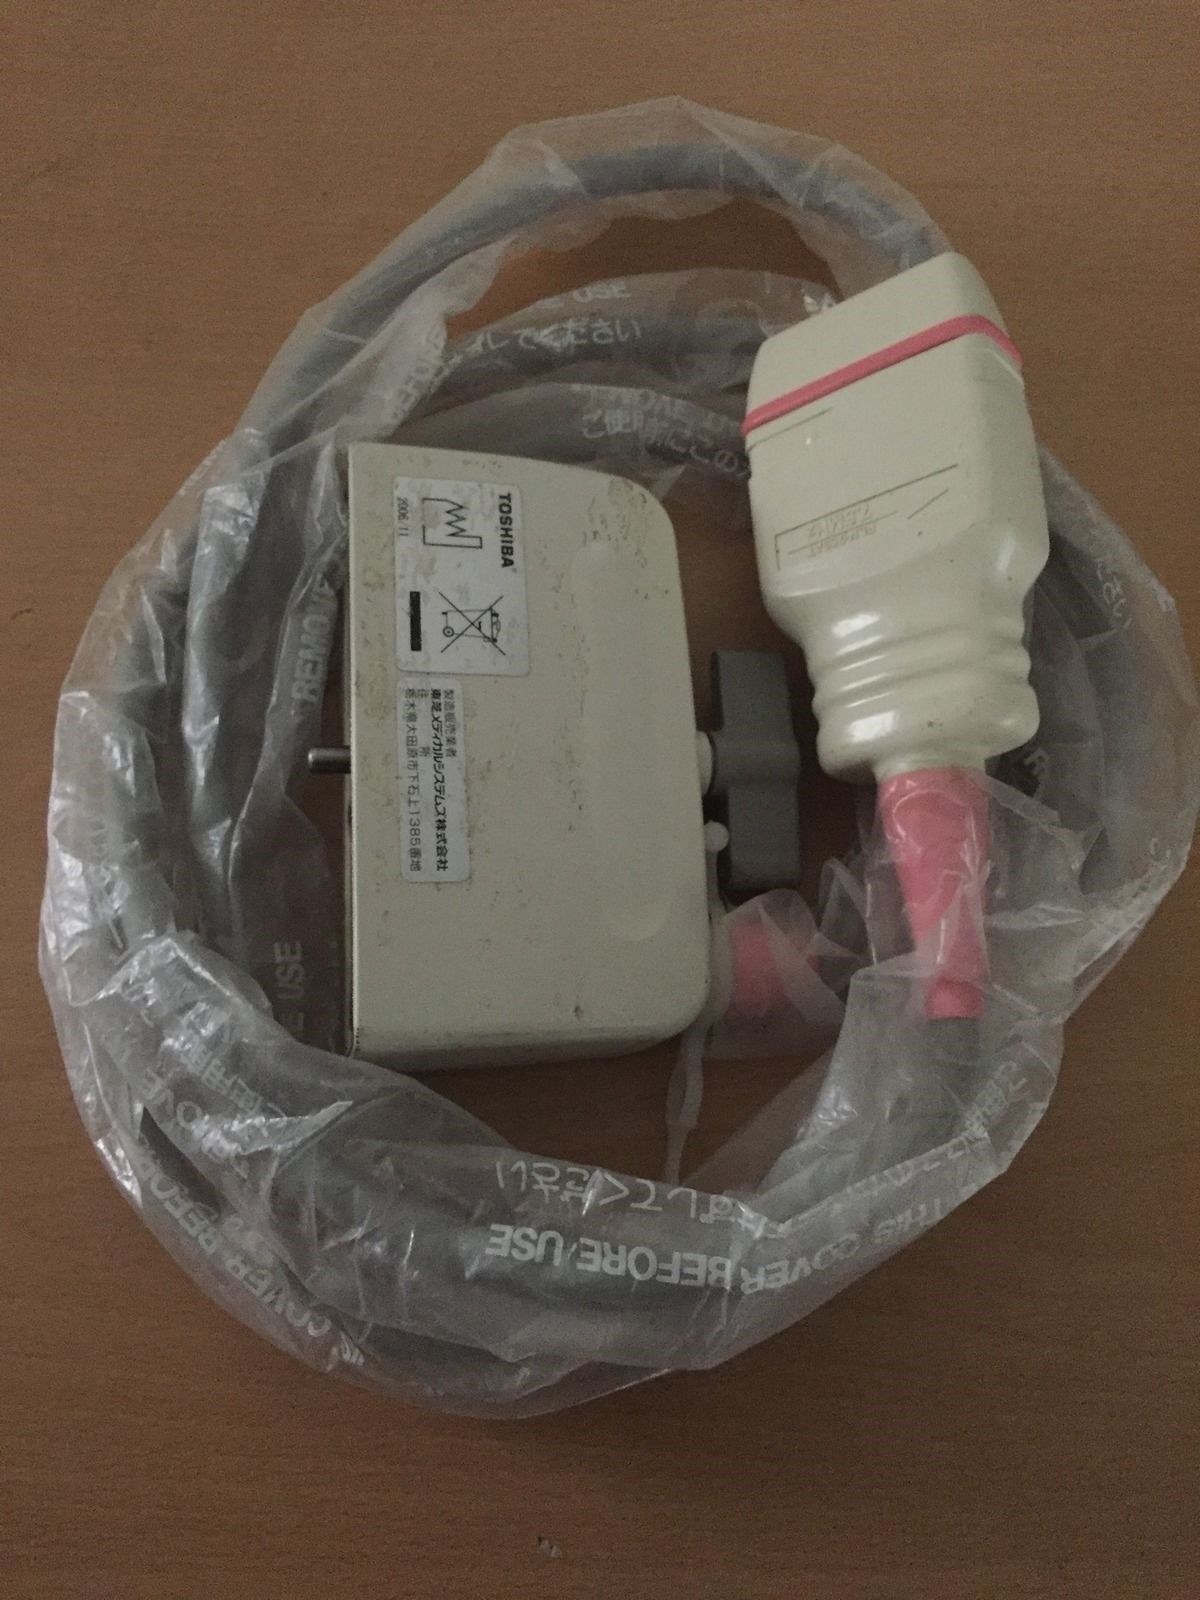 Toshiba PLN-703AT 7.5MHz Linear Array Ultrasound Transducer Probe DIAGNOSTIC ULTRASOUND MACHINES FOR SALE